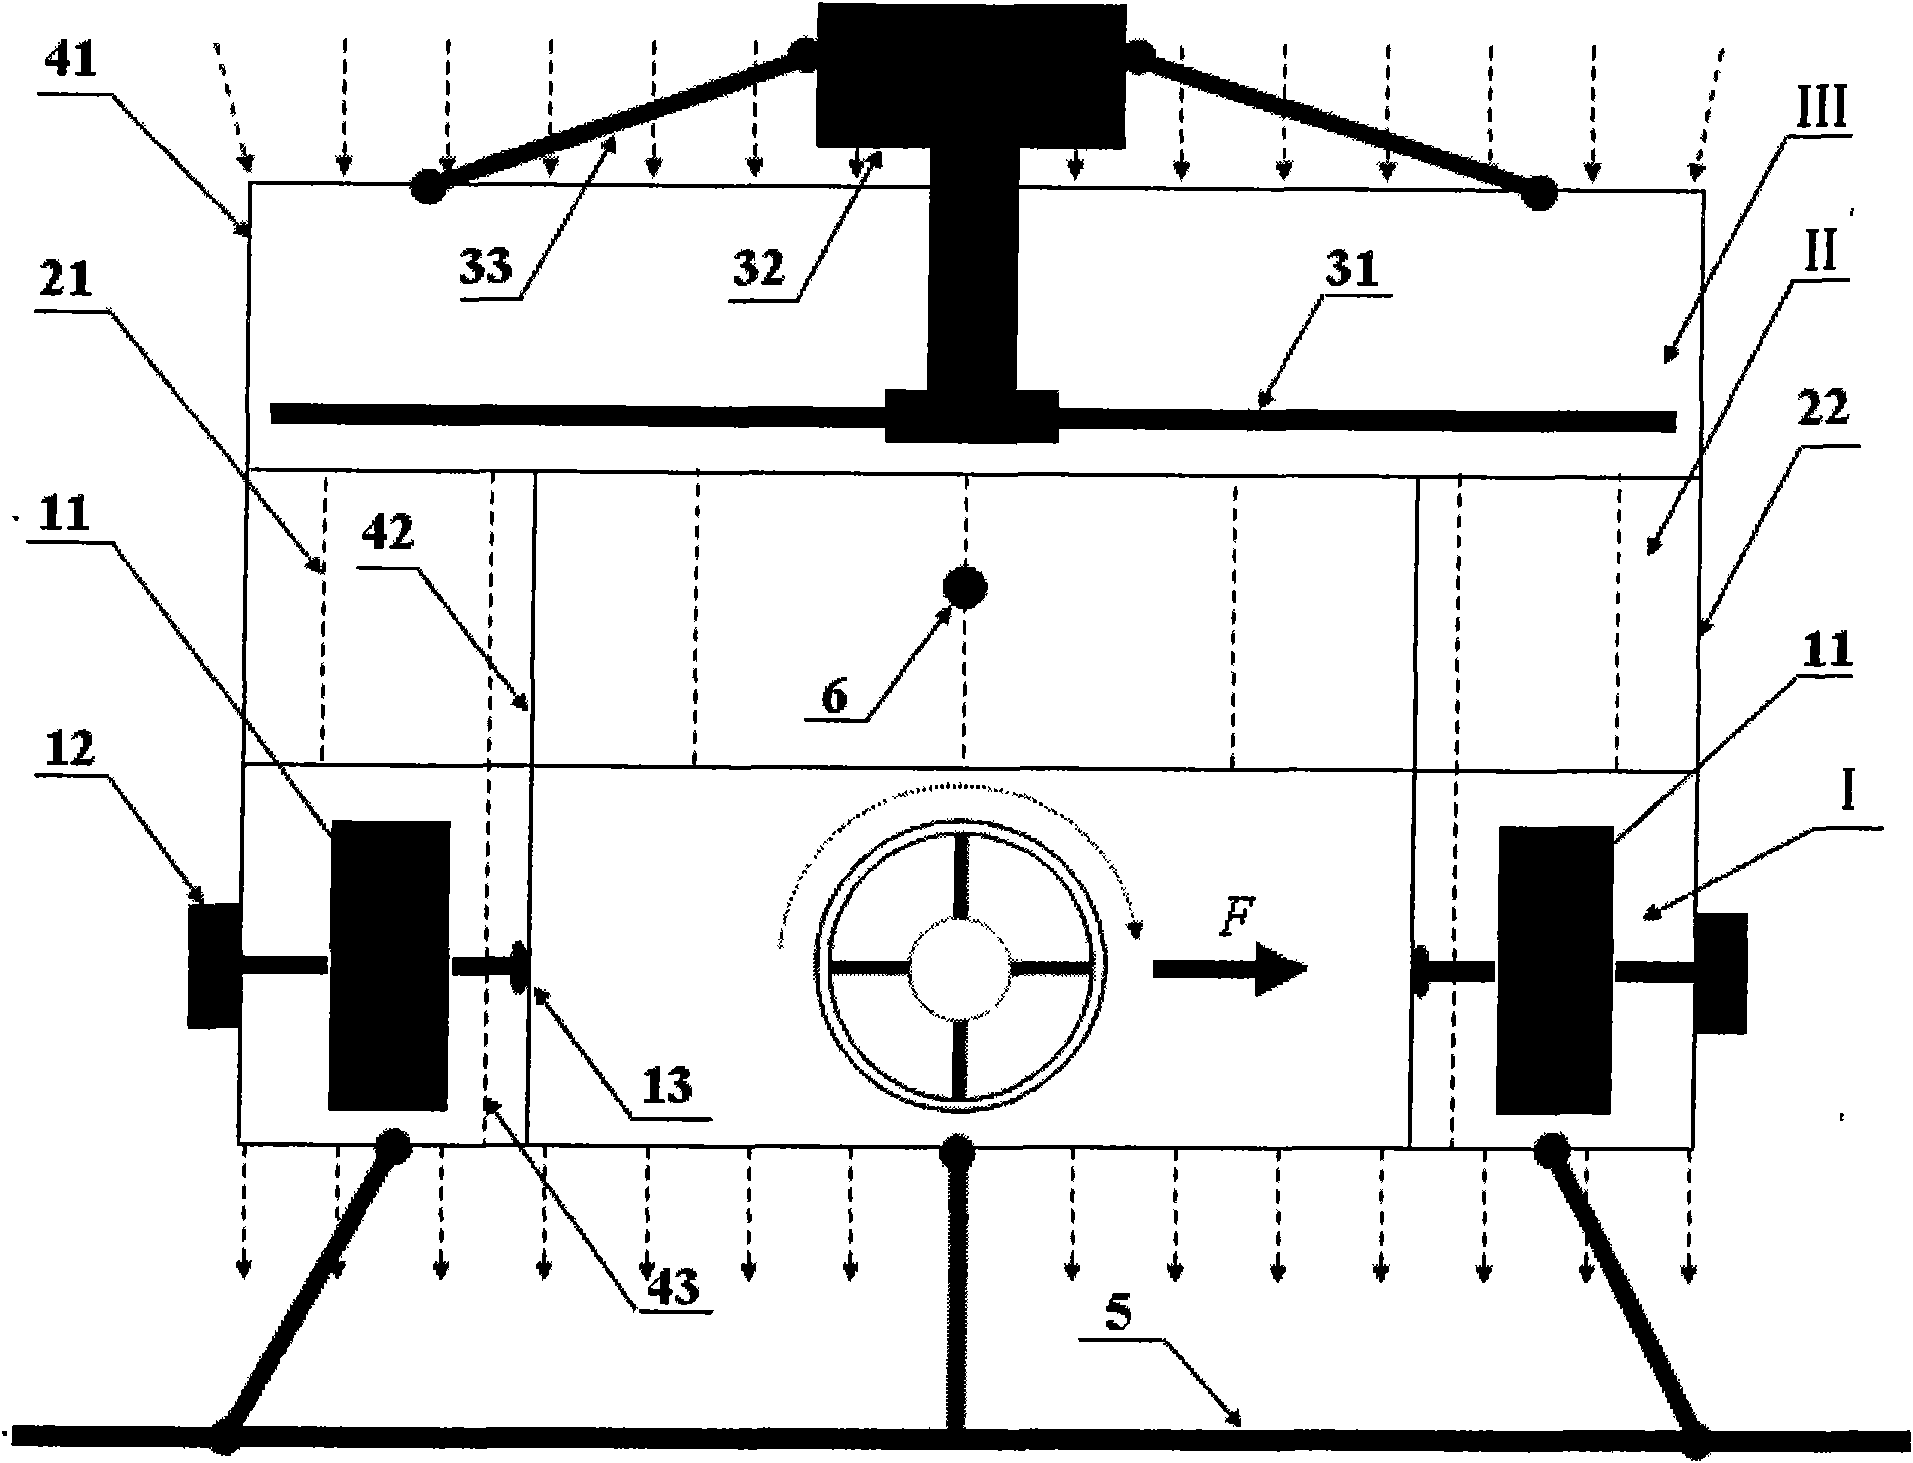 Duct single screw aircraft based on Magnus effect